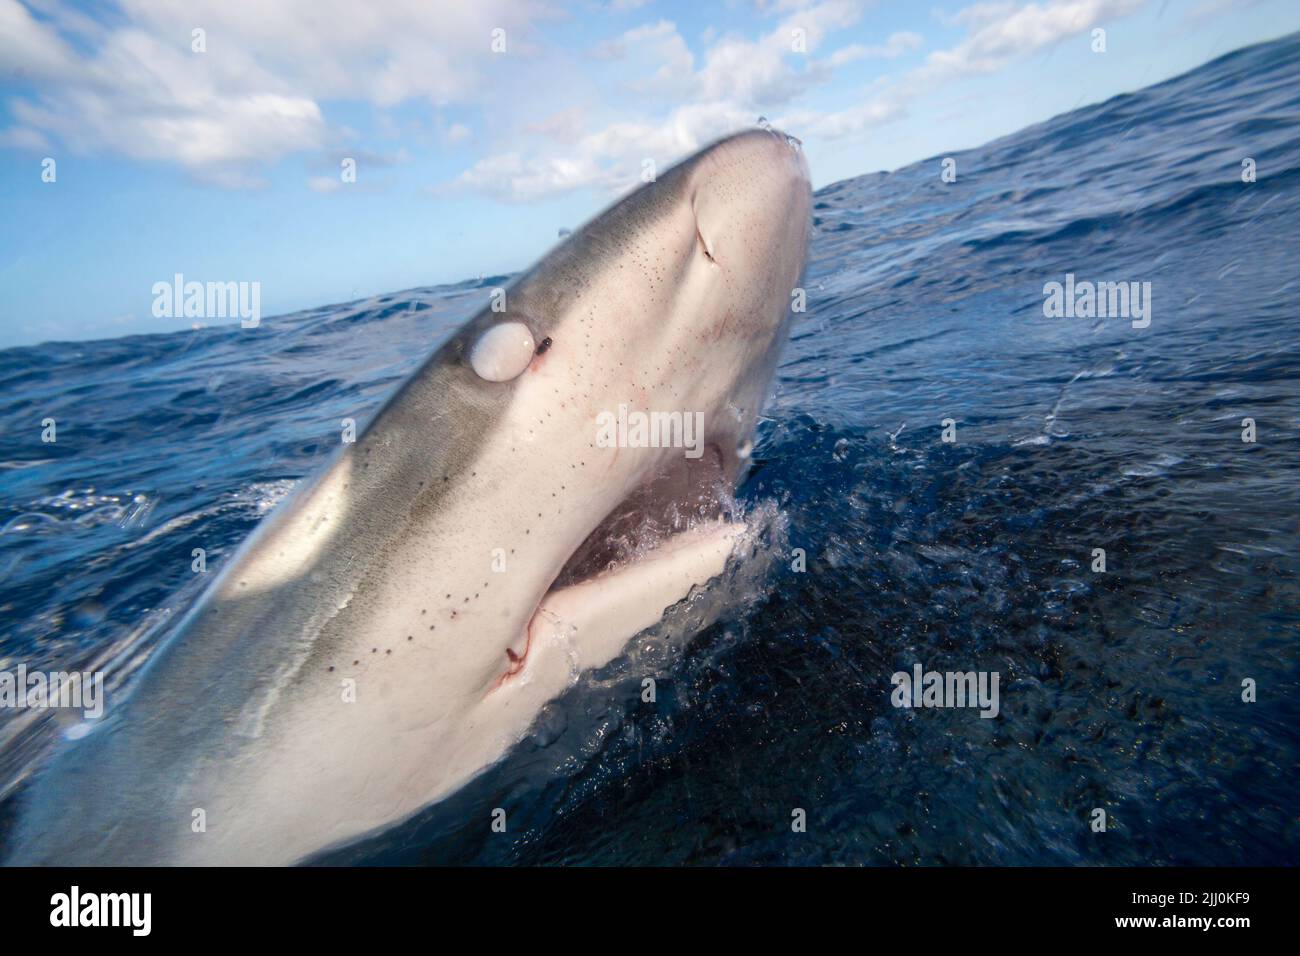 The Galapagos shark, Carcharhinus galapagensis can reach twelve feet in length and is listed as Òpotentially dangerousÓ. Covering itÕs eye is the nict Stock Photo